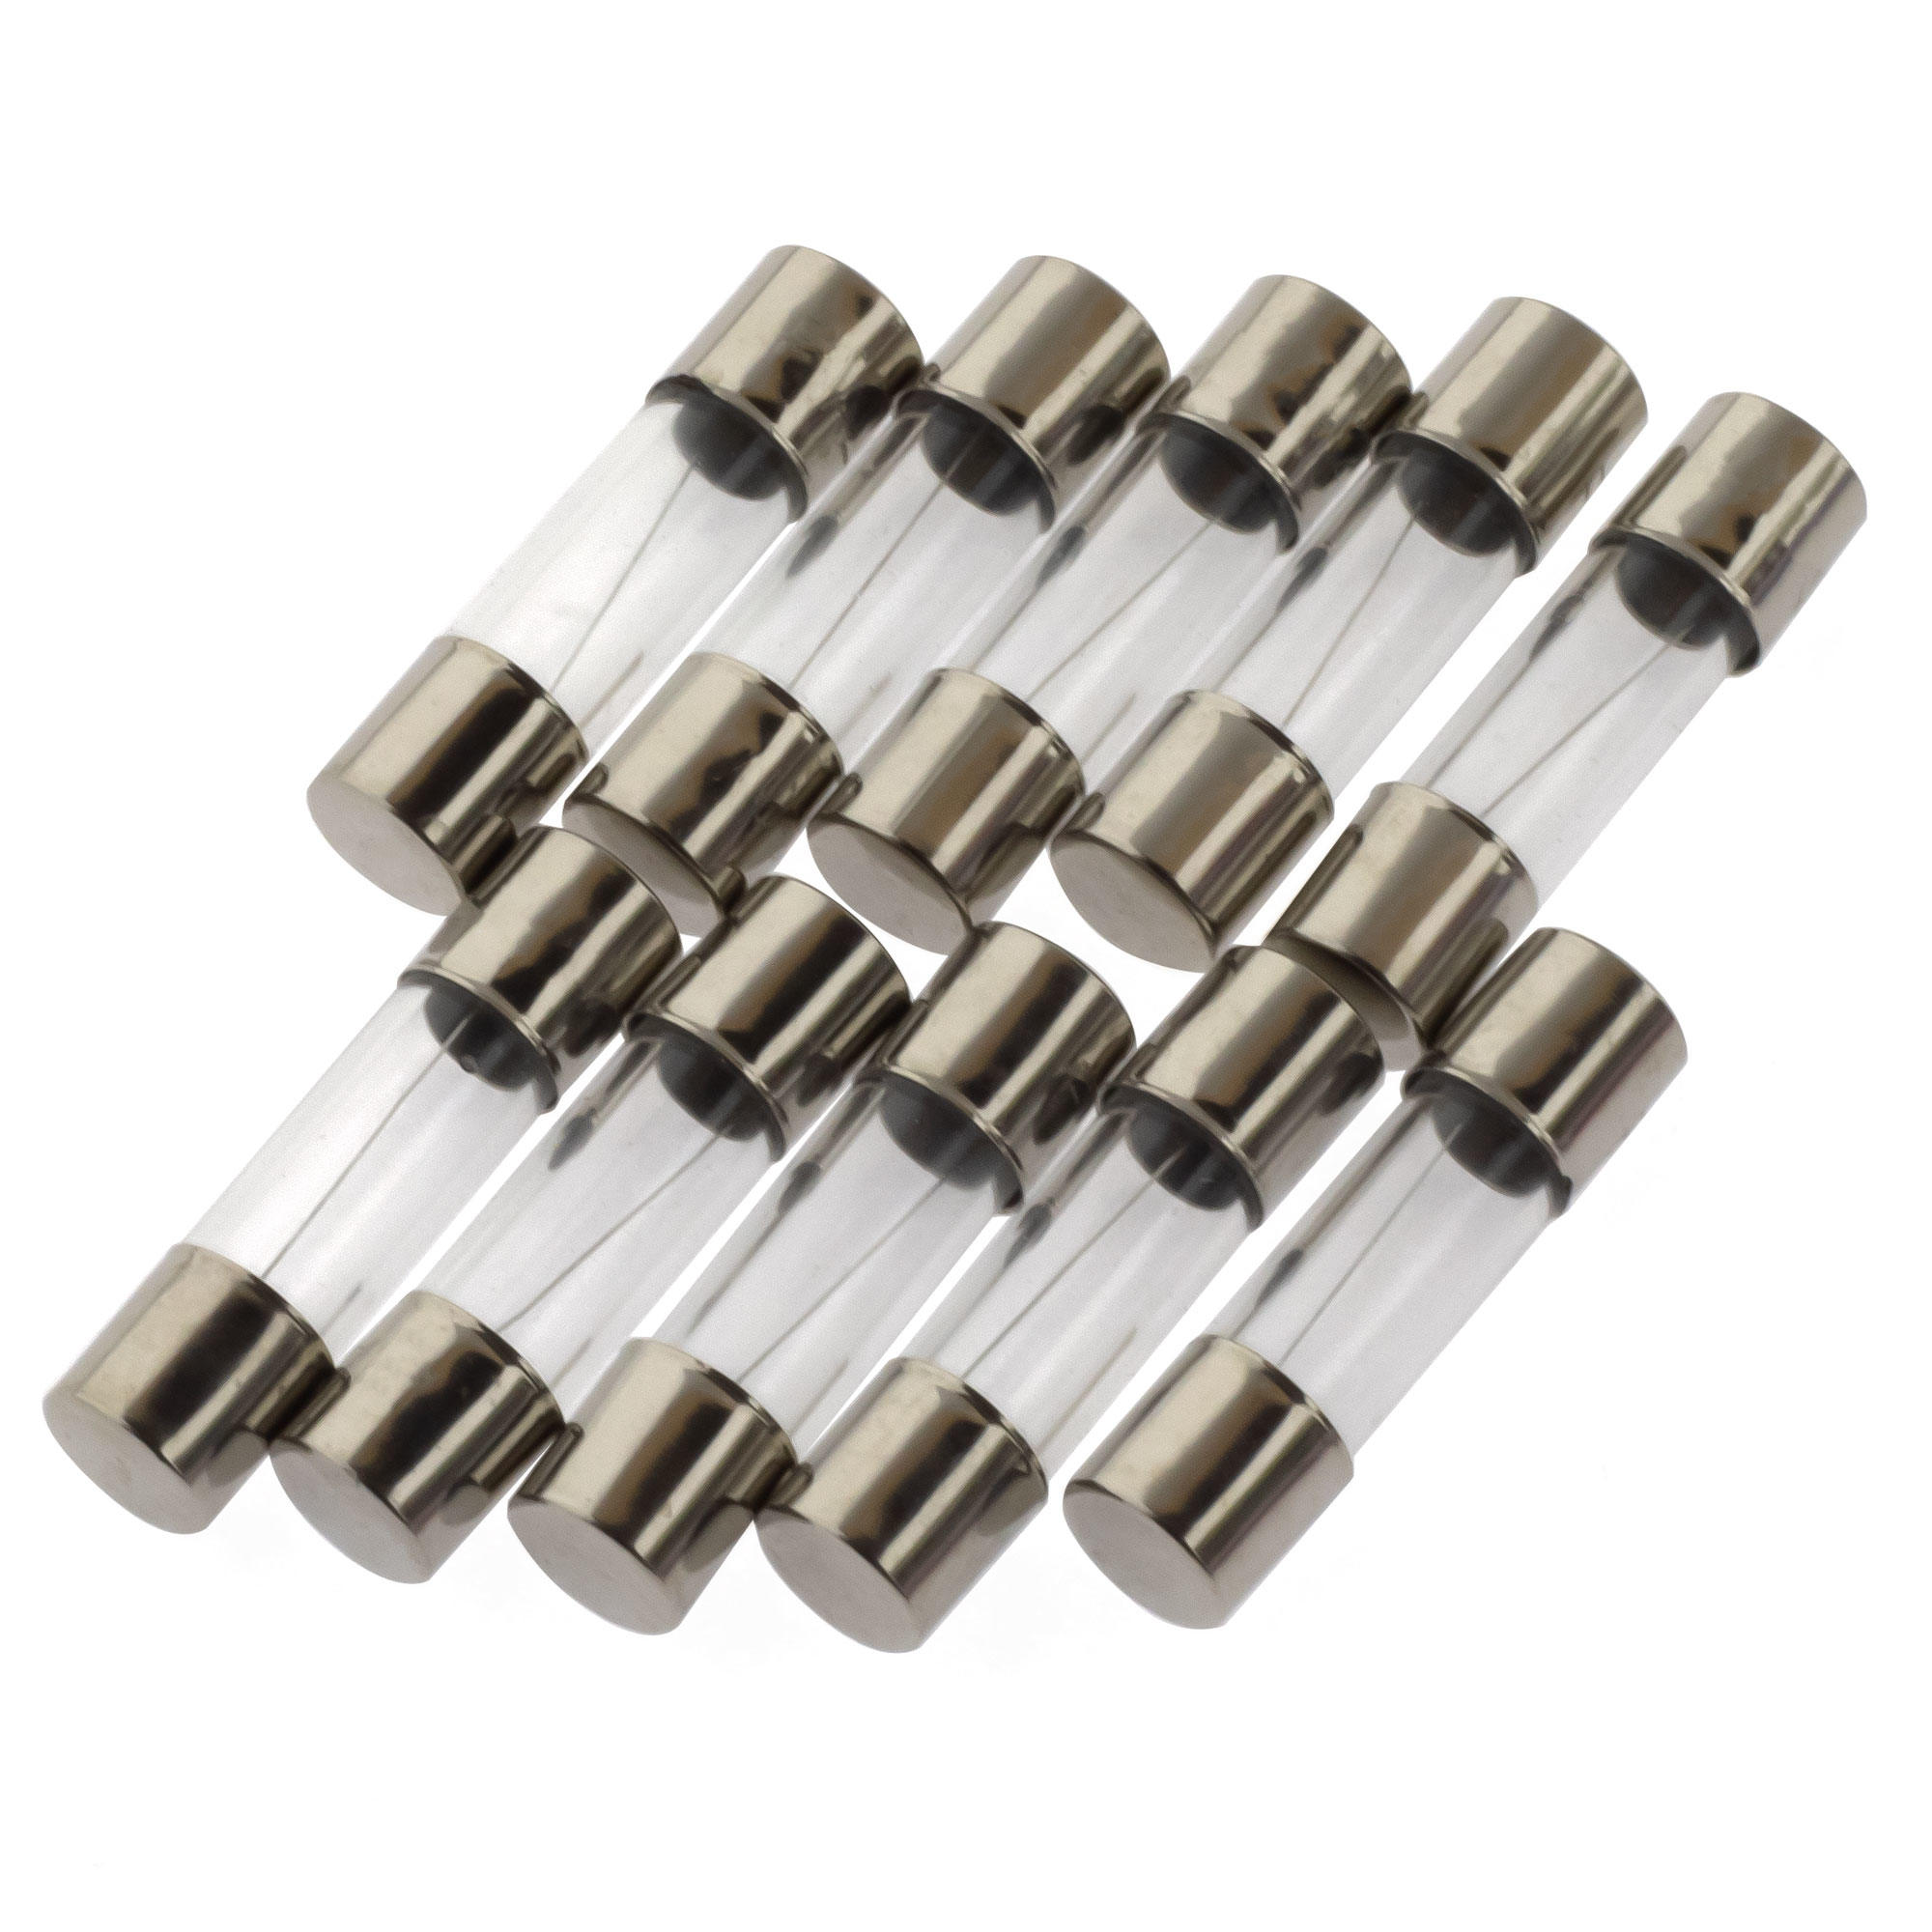 Micro Fuse 0,315A (315mA), 5x20mm, quick acting